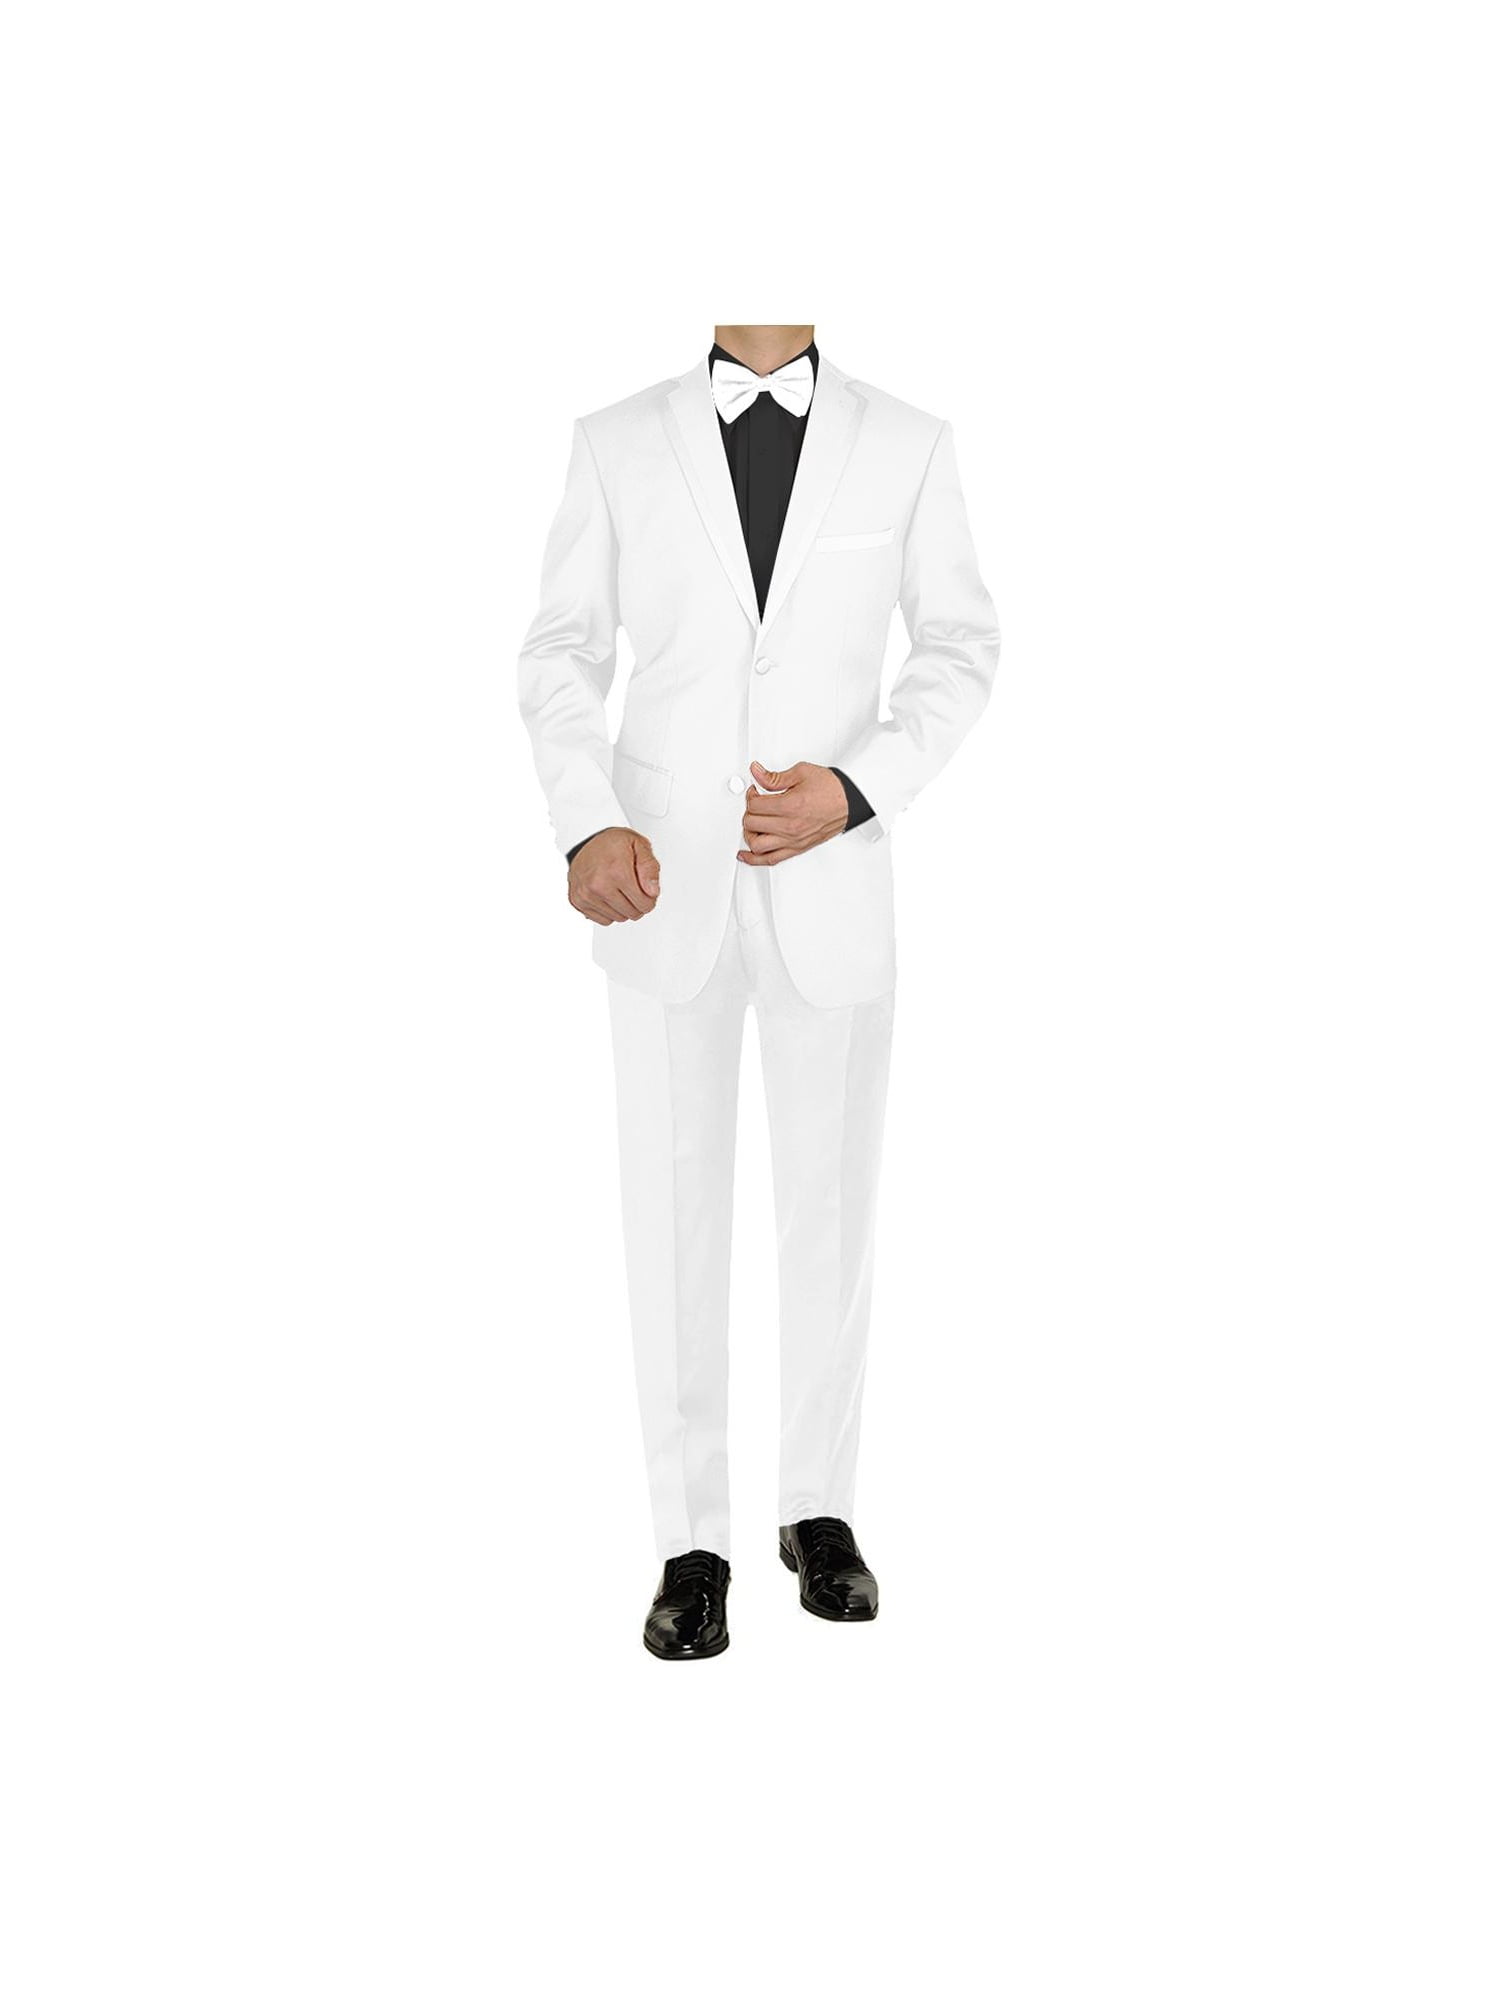 Wholesale JacketPantsVest WB118 Formal Prom Party Wearing Customized  Groom Wedding Tuxedos pant coat design men wedding suits pictures From  malibabacom